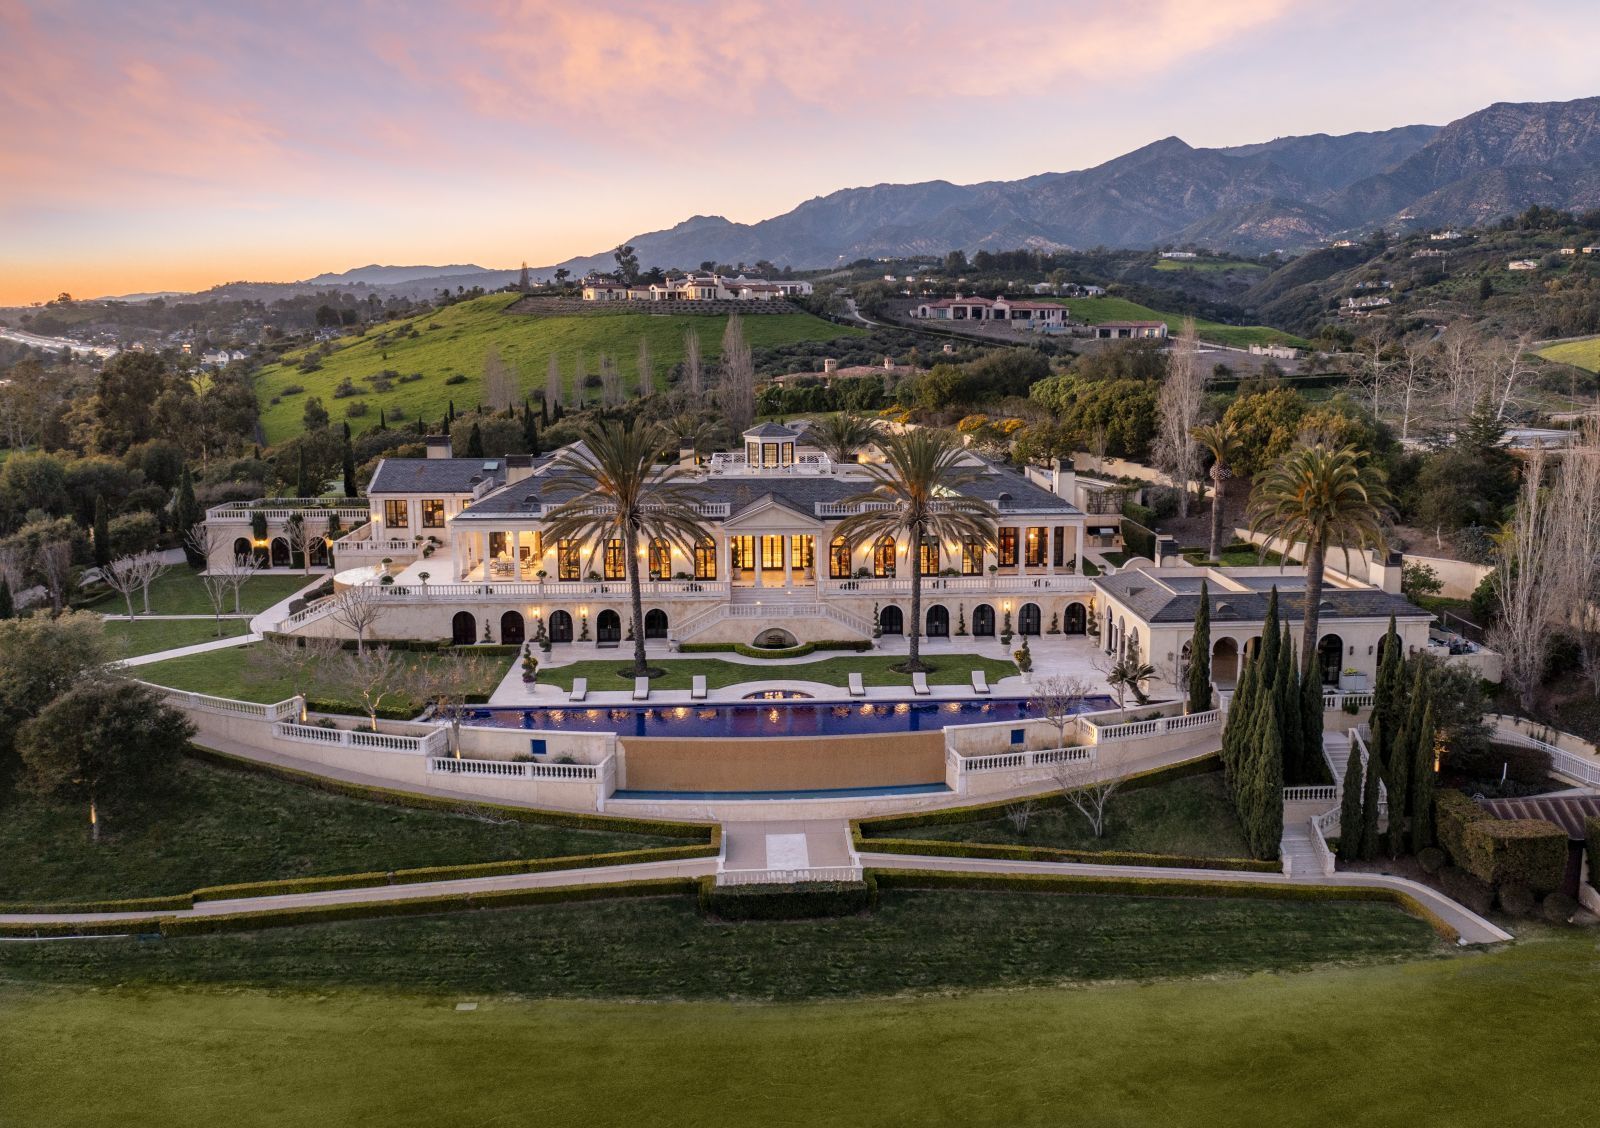 A sundet birds eye view of one of the grandest estates in North America, illuminated from within, with its 125-ft-long pool and polo field in the foreground and mountains in the background...